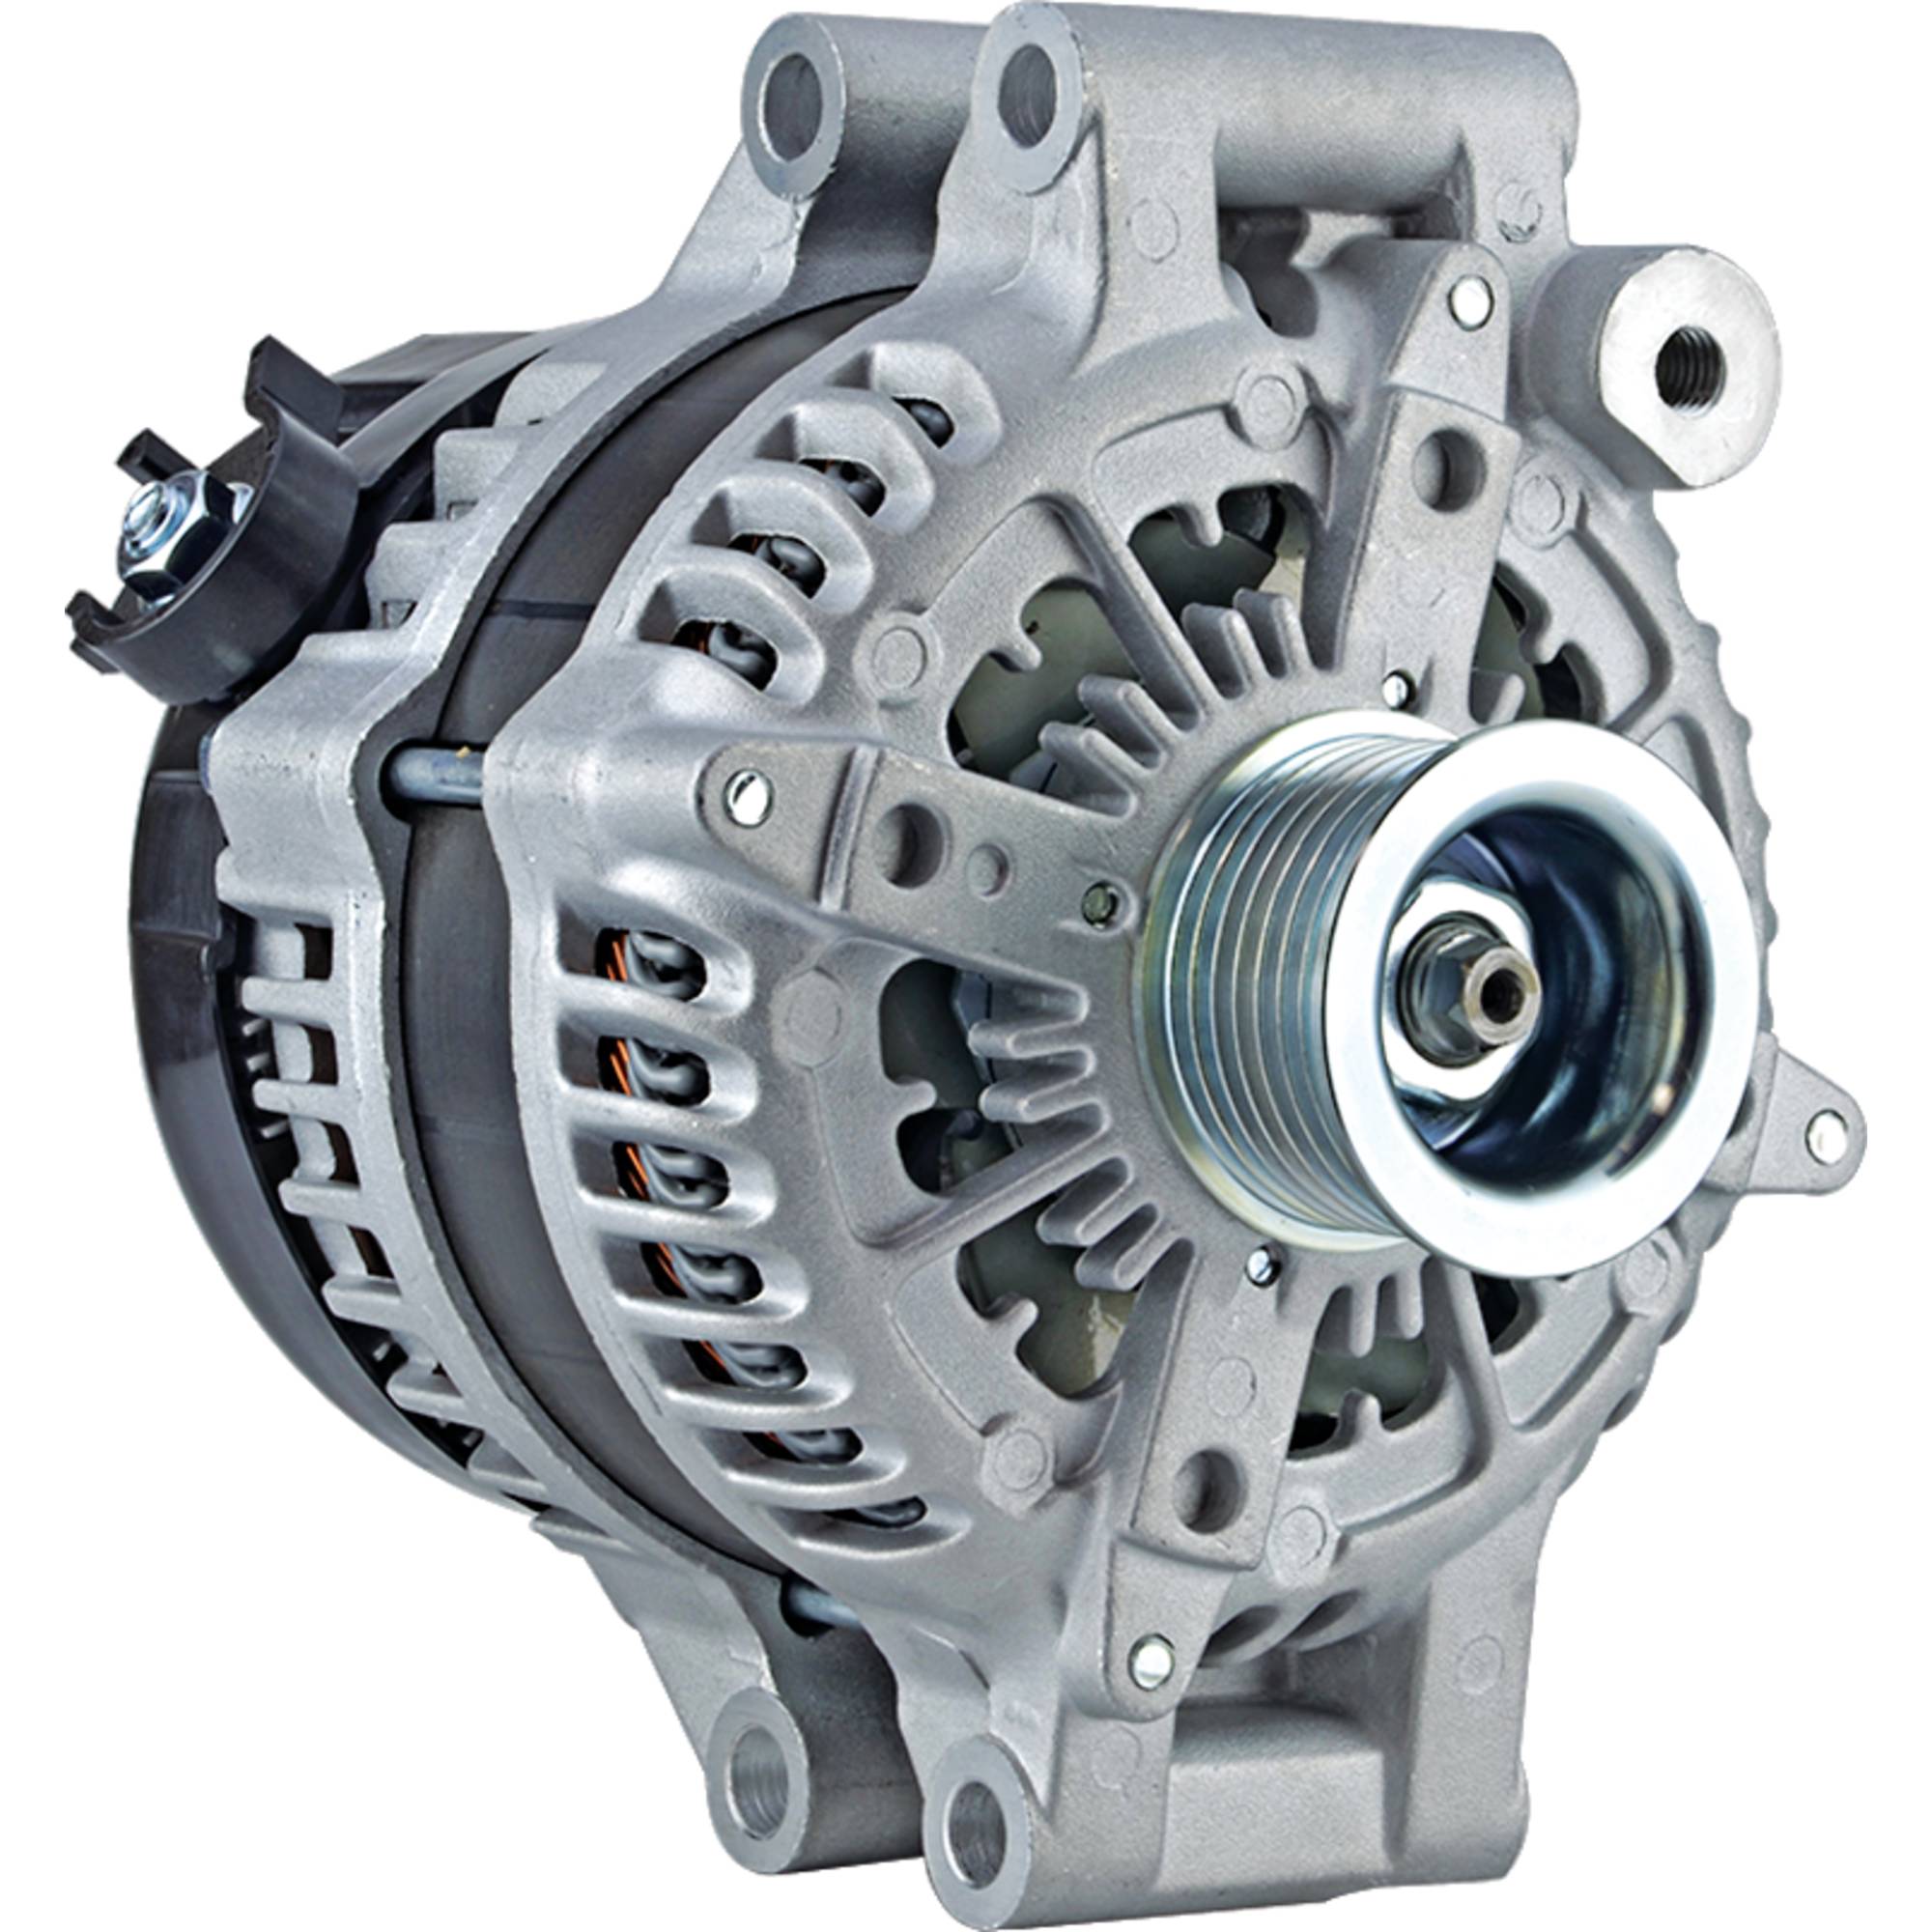 DB Electrical Remanufactured Alternator for 4.4L BMW 750 Series 11 12 13 14 15 12-31-7-606-628